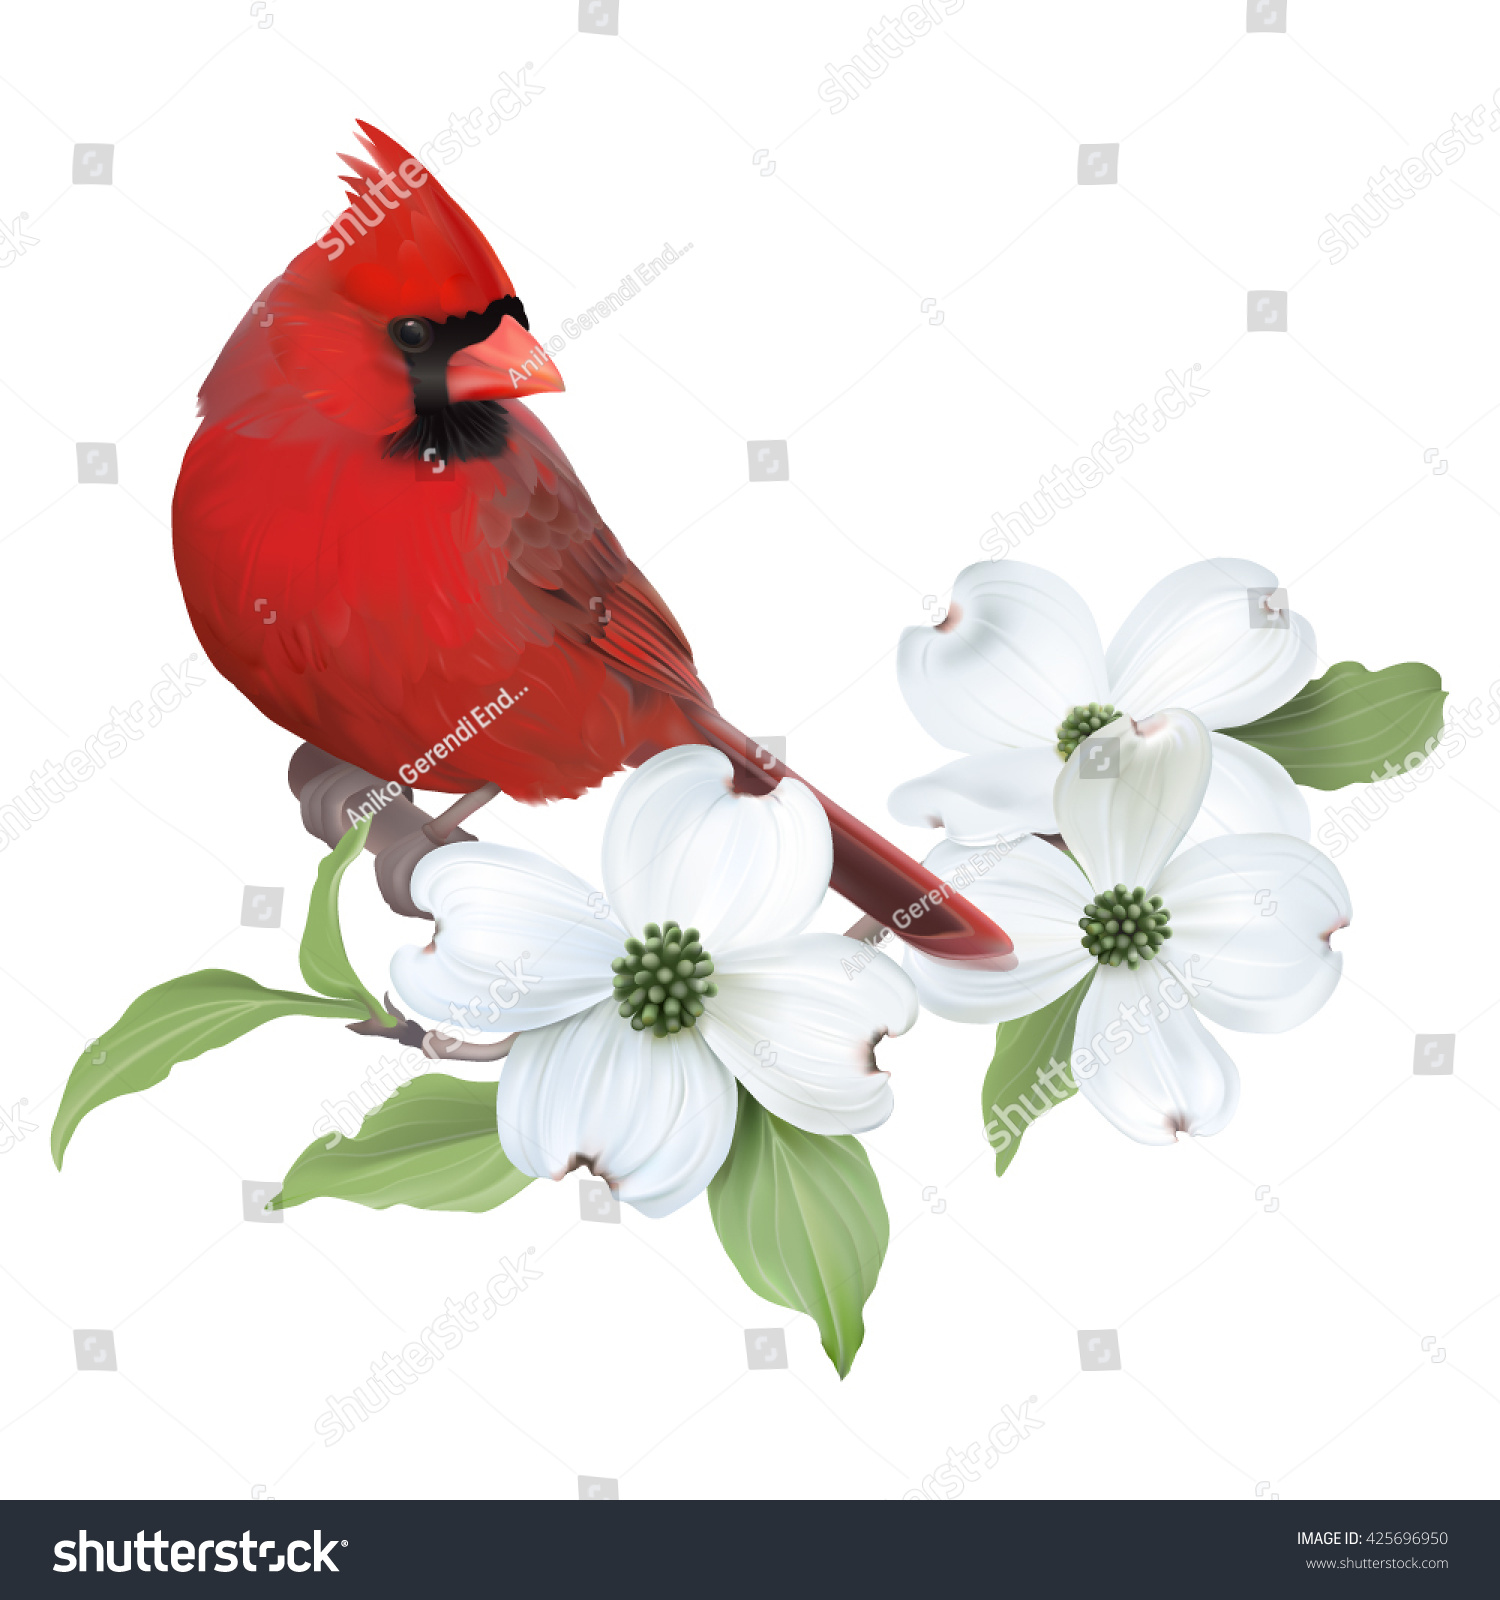 SVG of Northern Cardinal perched on a blooming White Dogwood.
Hand drawn vector illustration on transparent background, realistic representation. svg